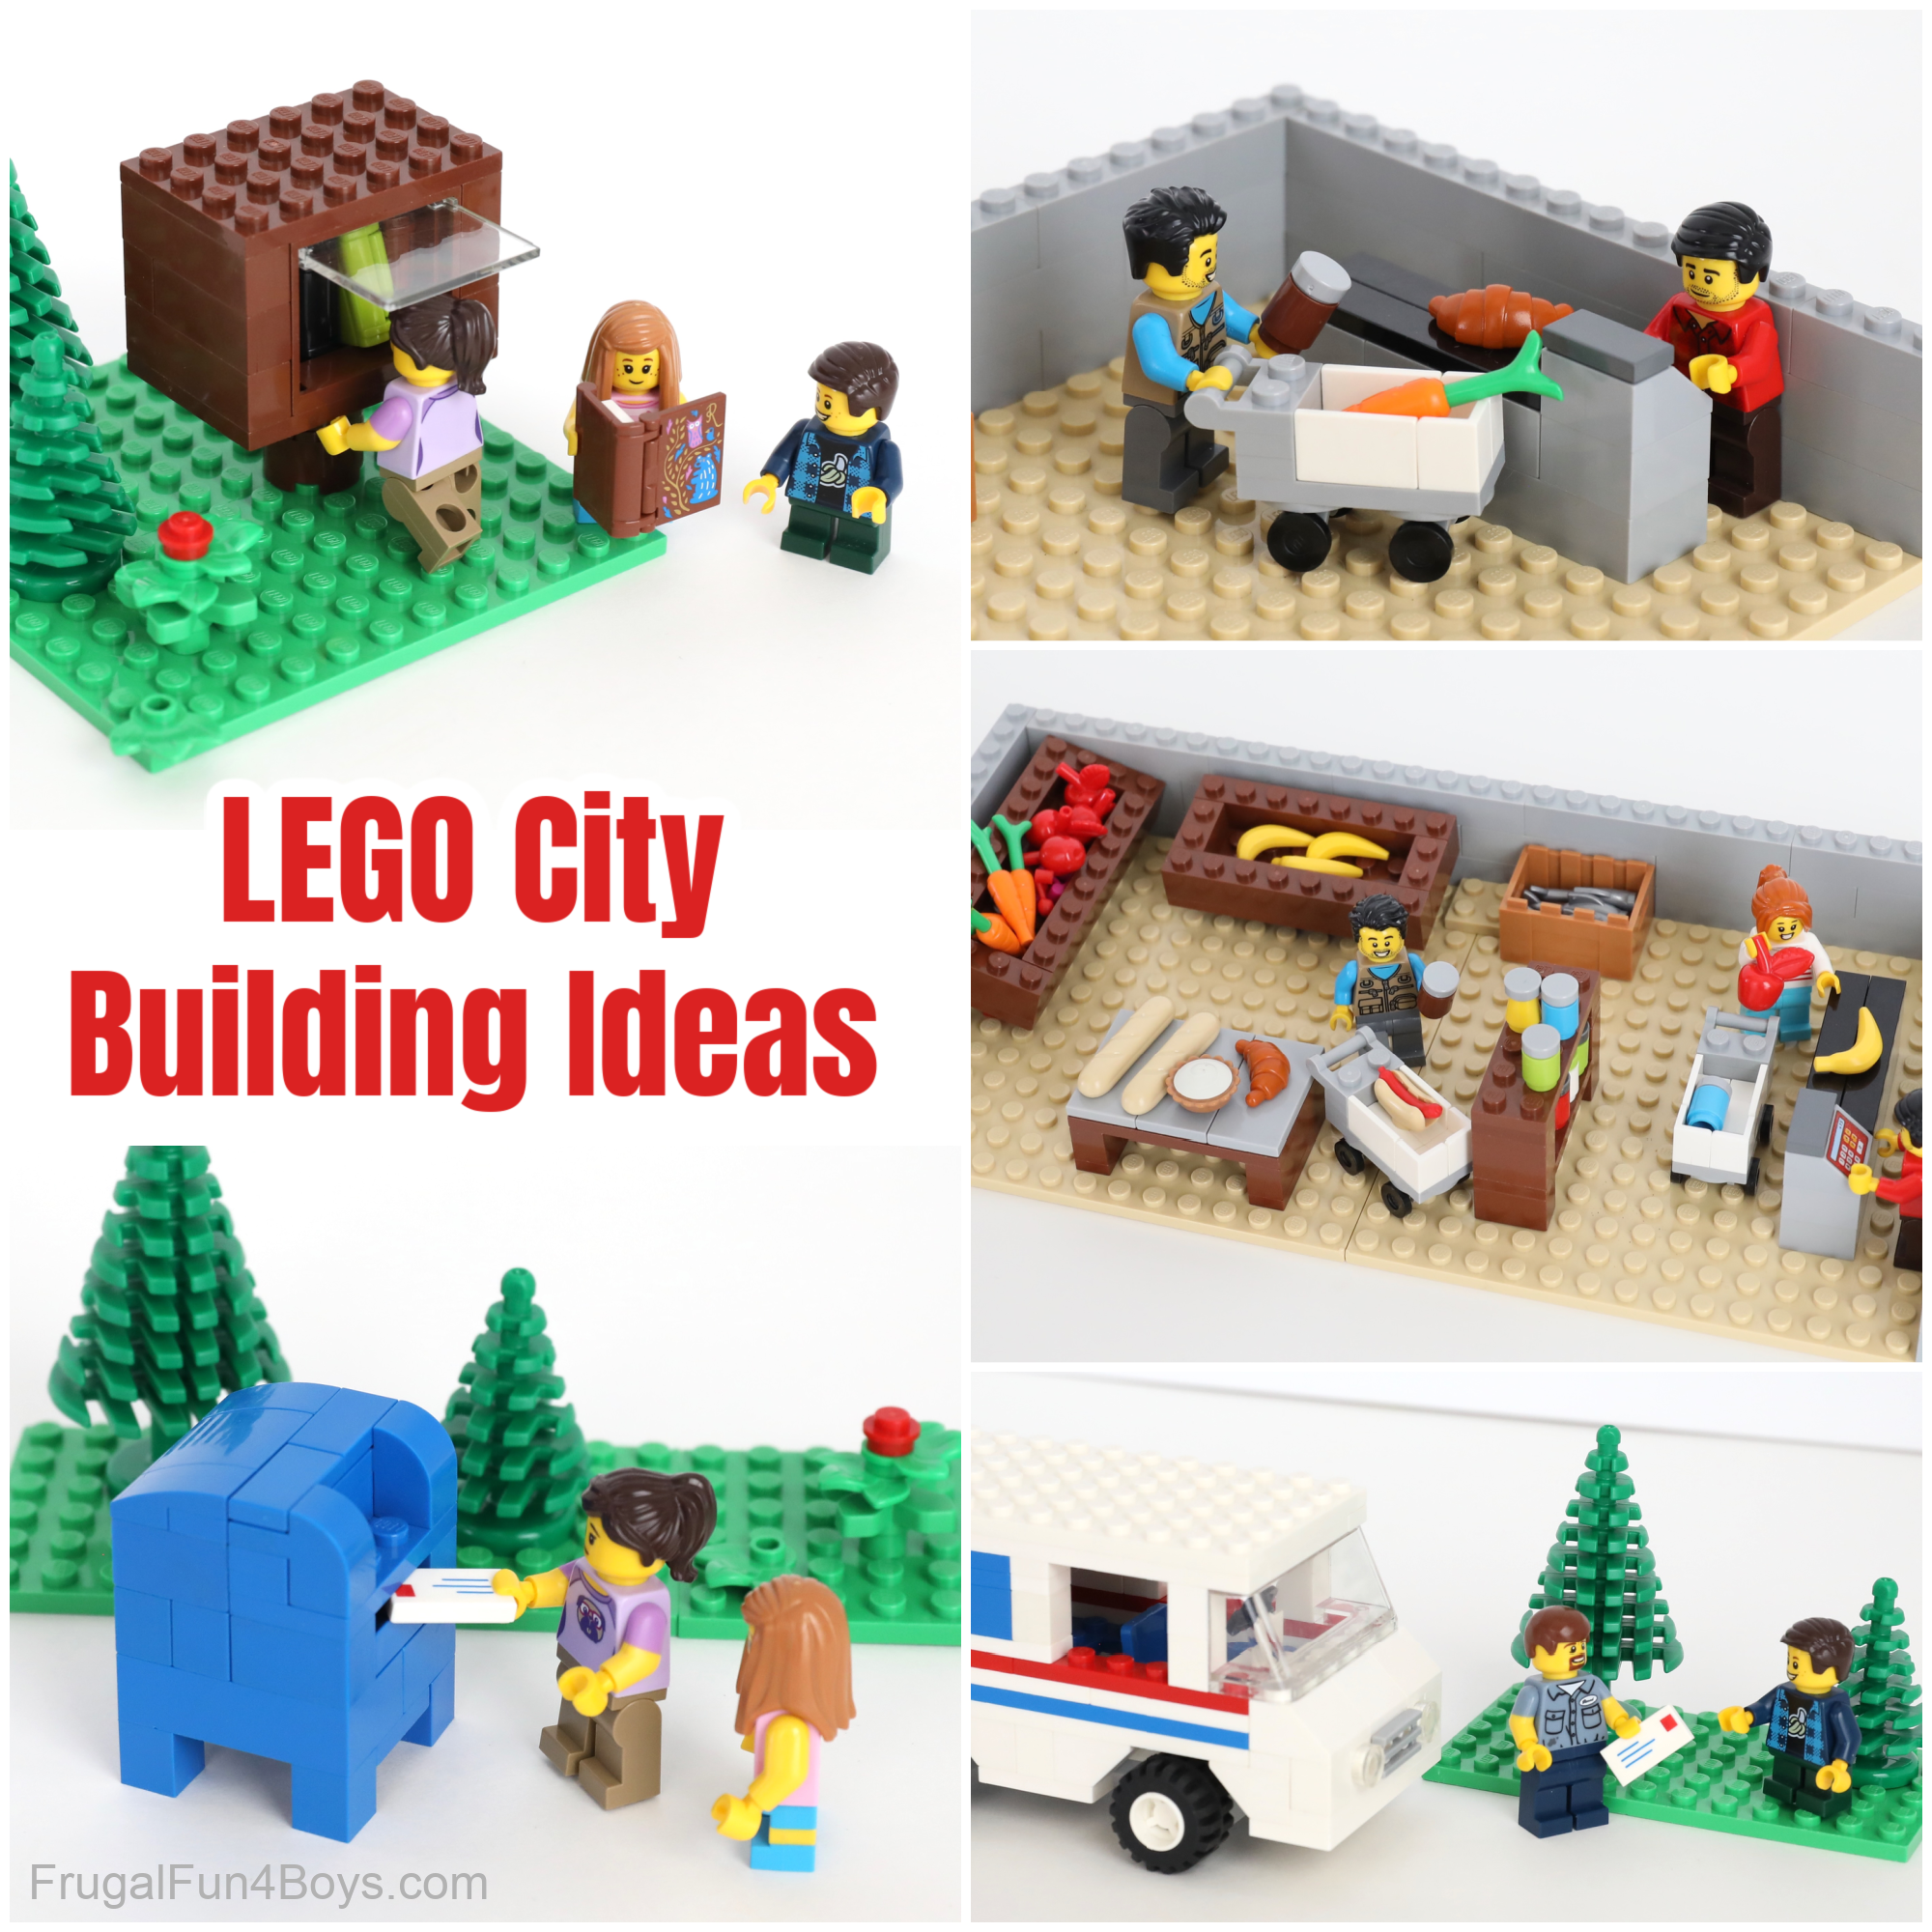 City Building Ideas - Fun For and